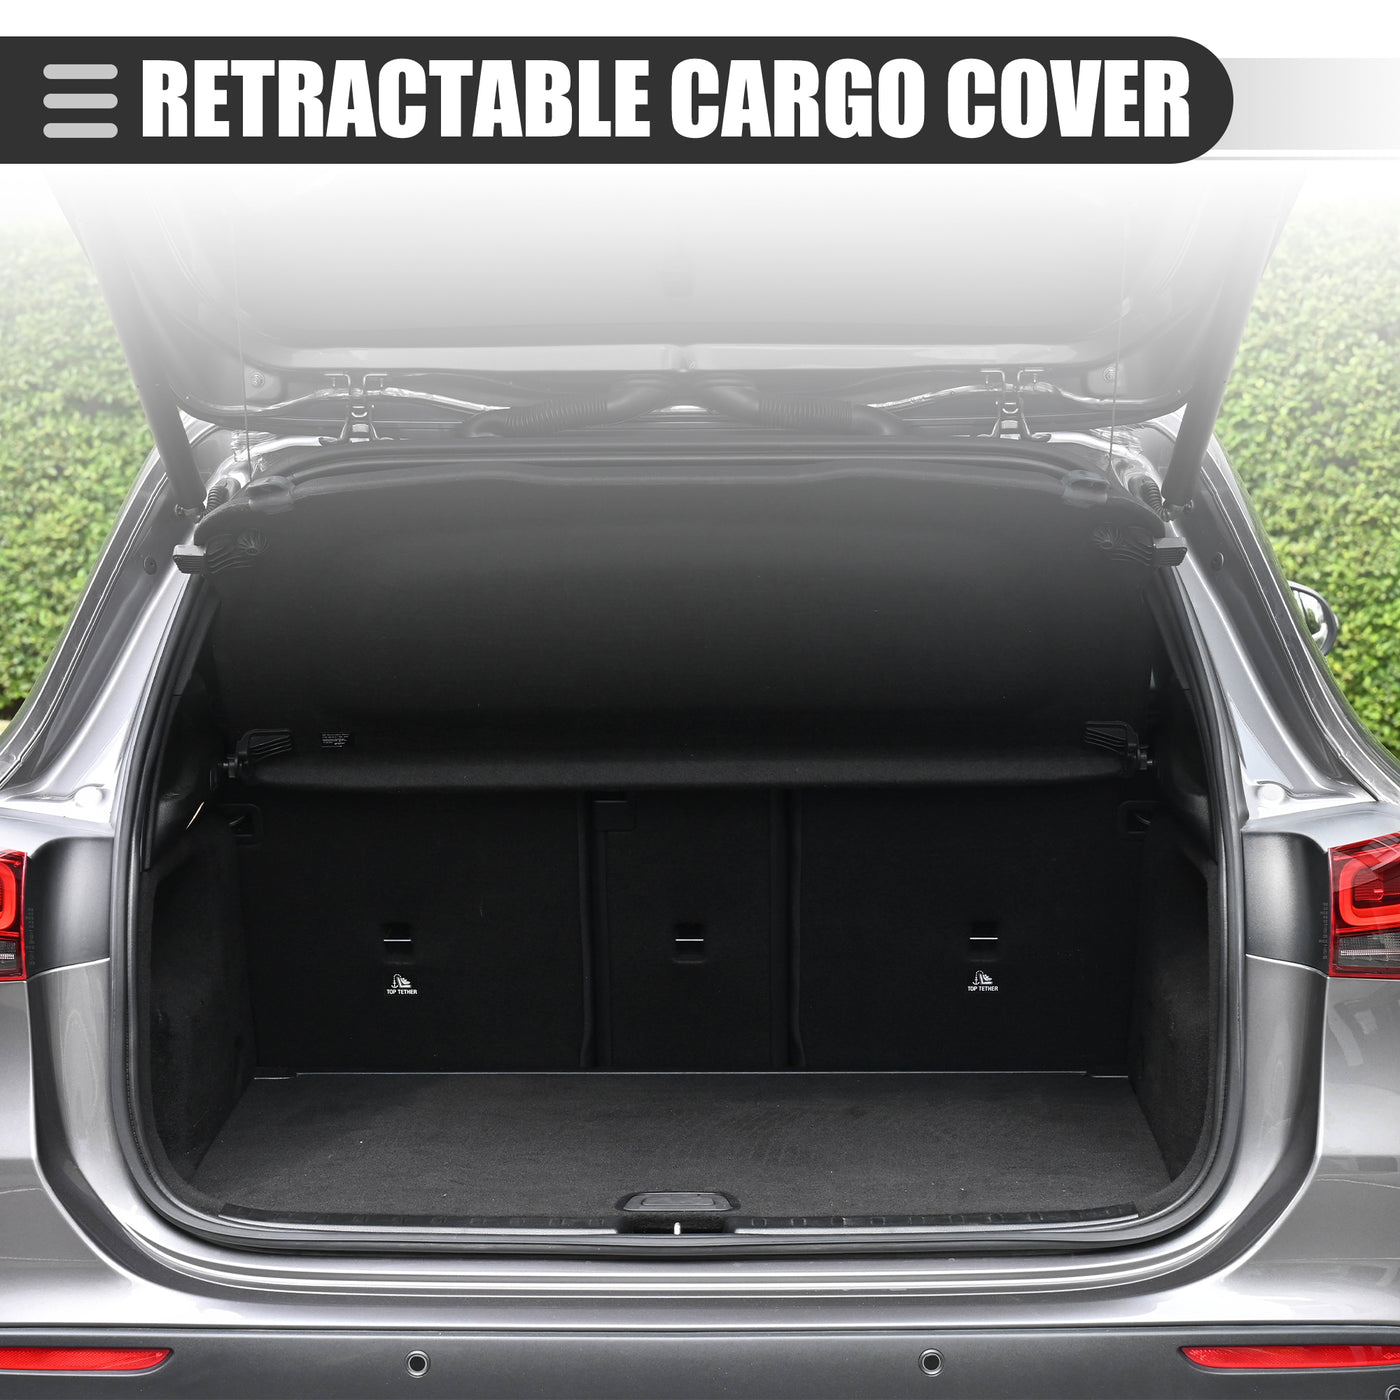 Motoforti Retractable Cargo Cover, Heat Resistant Rear Trunk Security Cover Shield Shade, for Volvo XC90 2016-2023, Waterproof Canvas, Black